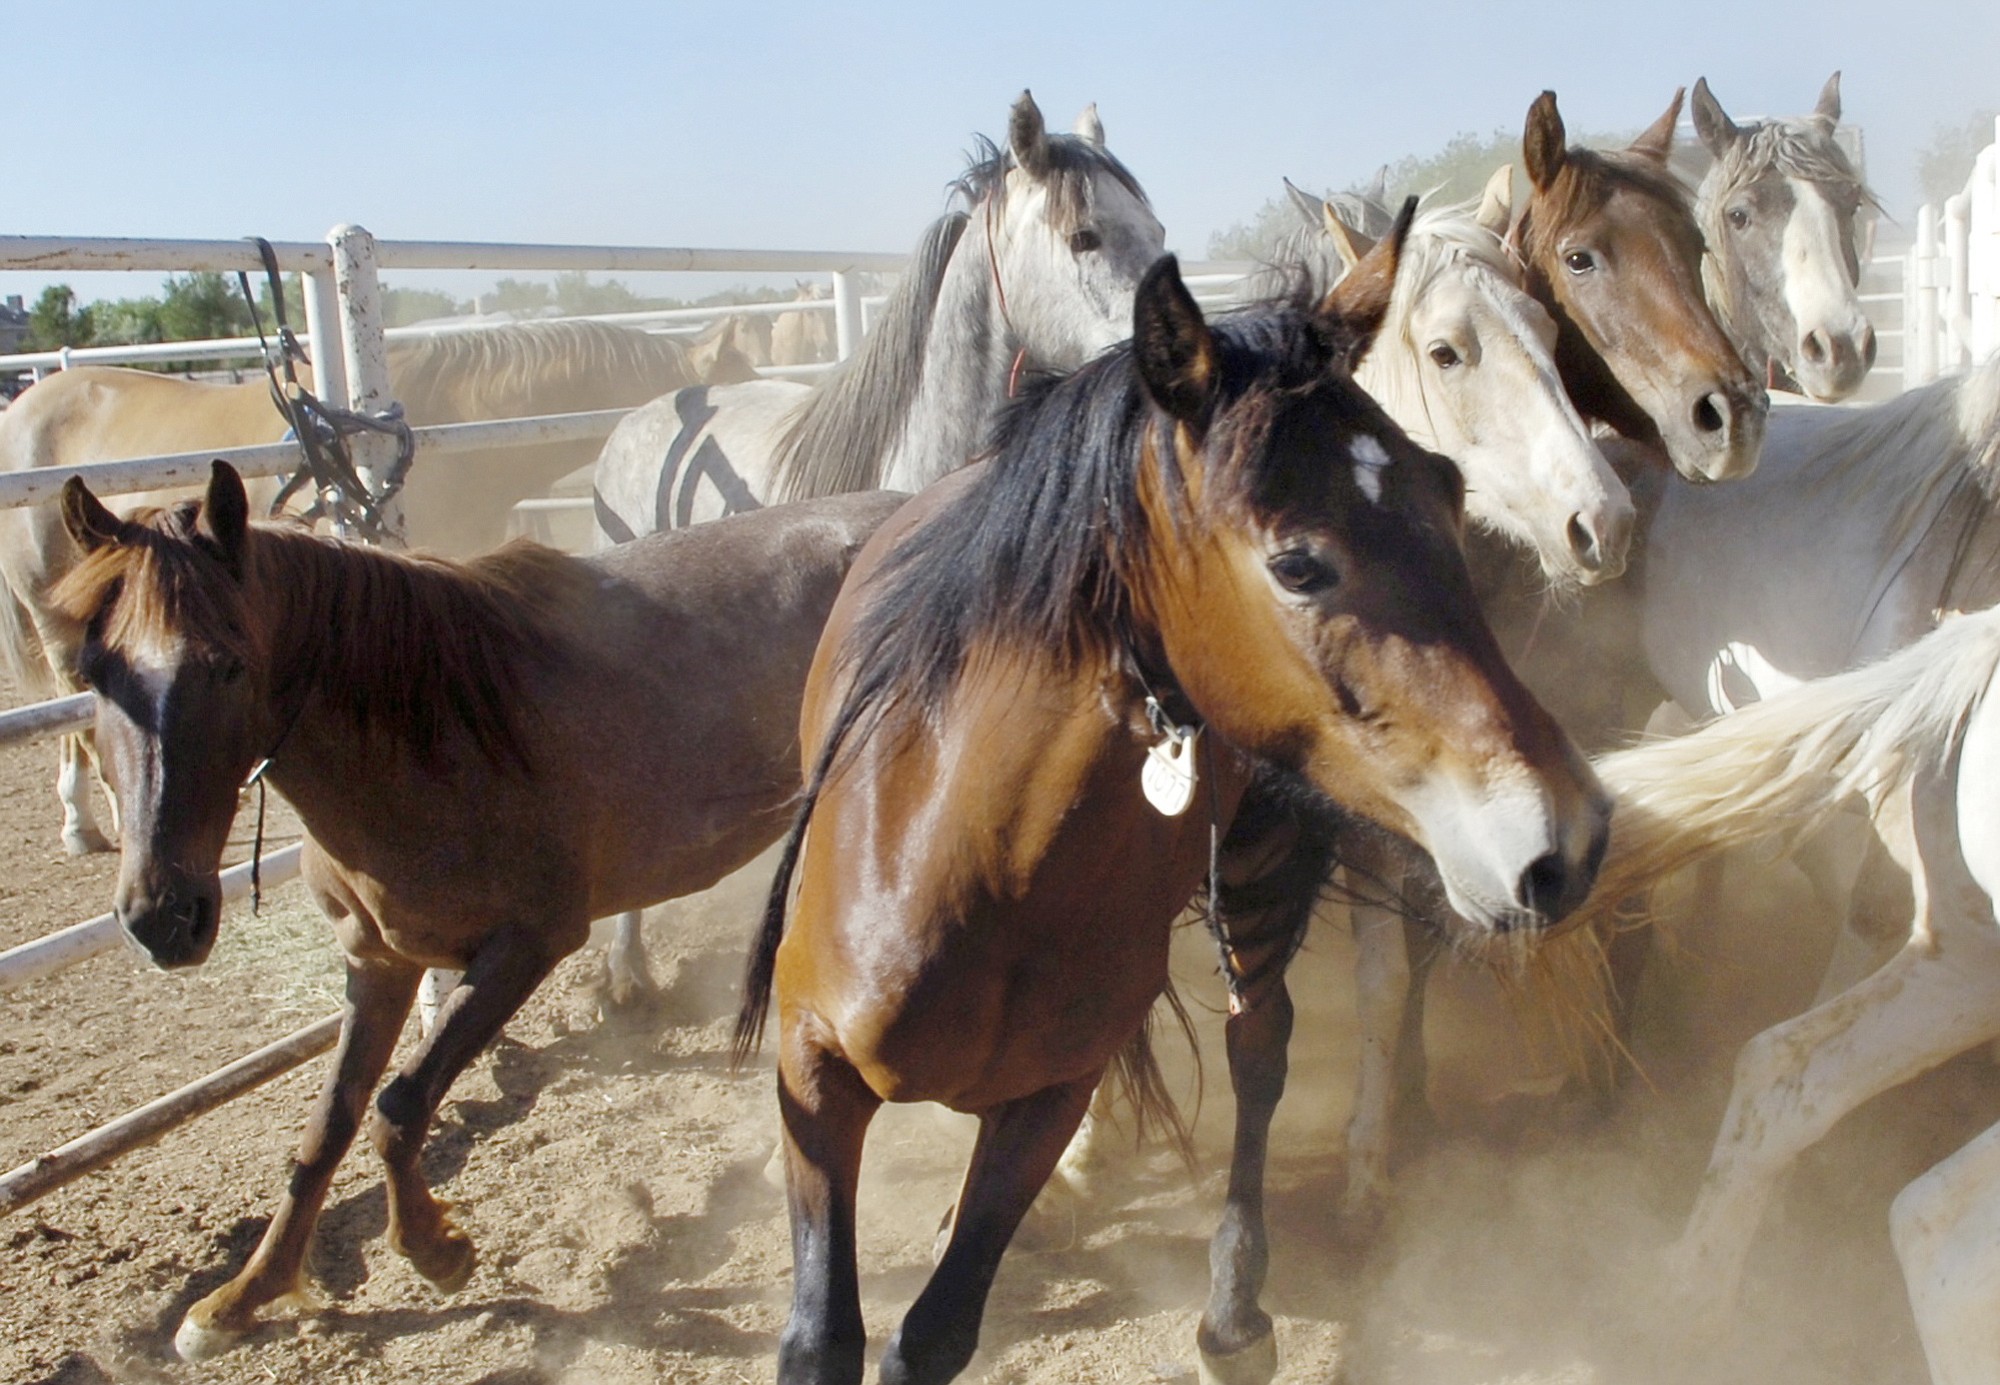 Marla Brose/Albuquerque Journal files
Wild horses run into the Bernalillo County Sheriff's Posse Arena in Albuquerque, N.M., in May 2006. Federal land managers are under fire from animal welfare activists for seeking to increase contracted holding space for wild horses removed from Western rangelands.